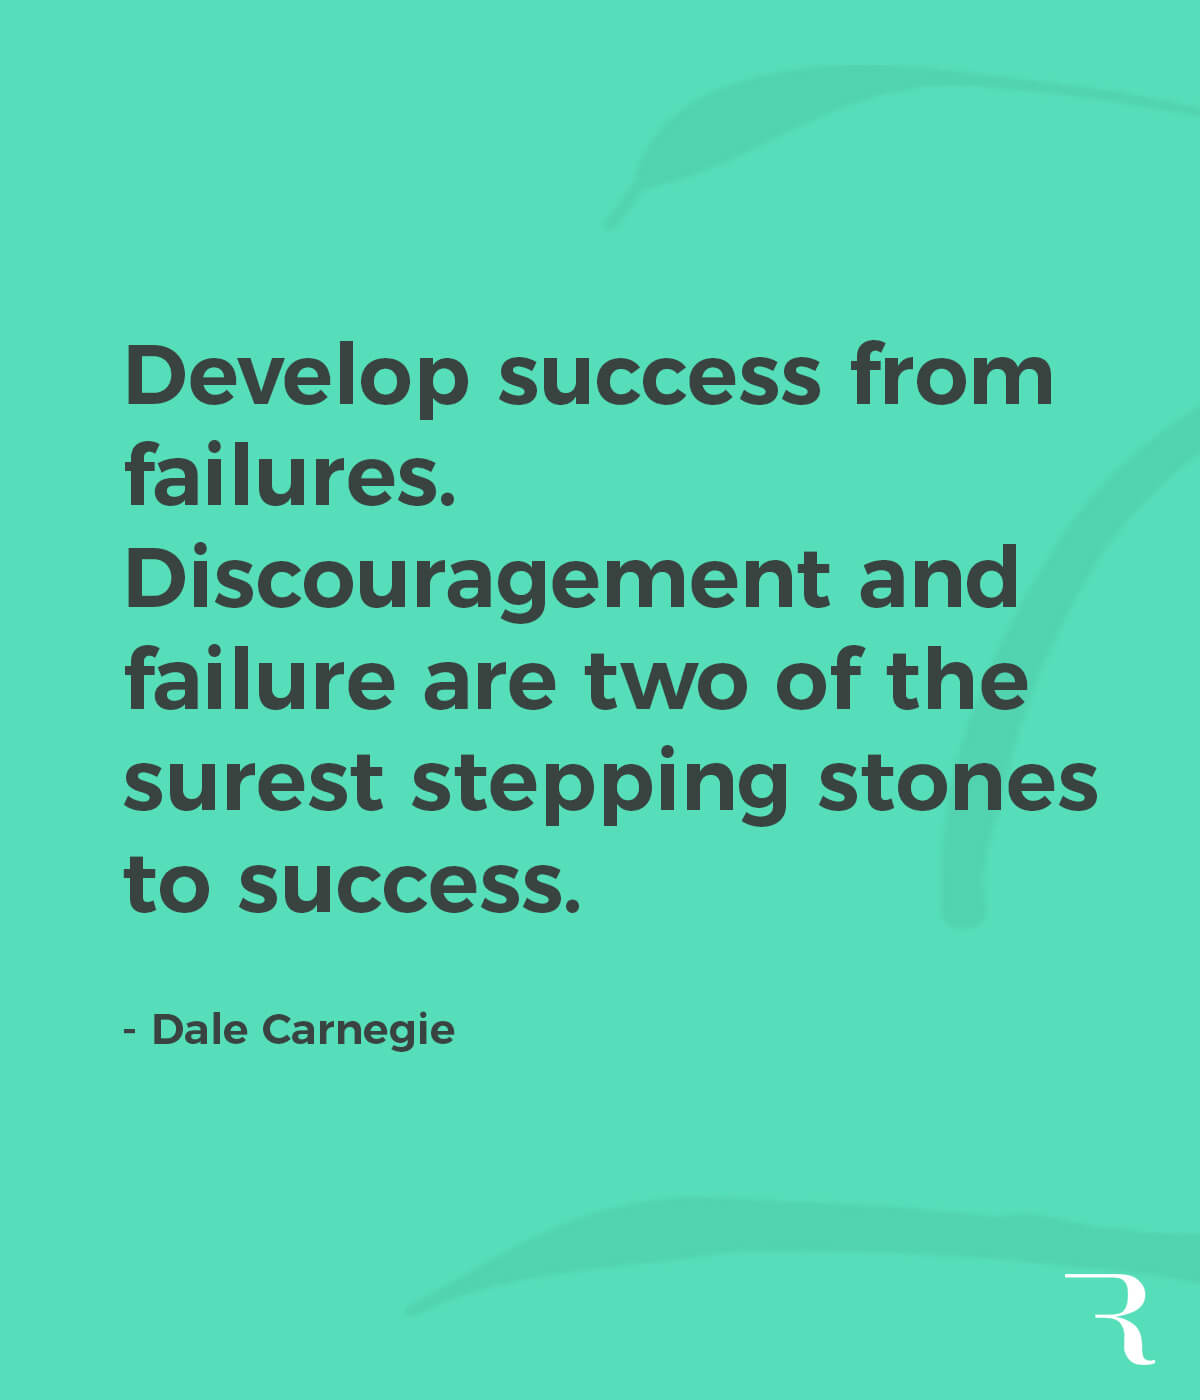 Motivational Quotes: "Discouragement and failure are two of the surest stepping stones to success." 112 Motivational Quotes to Be a Better Entrepreneur